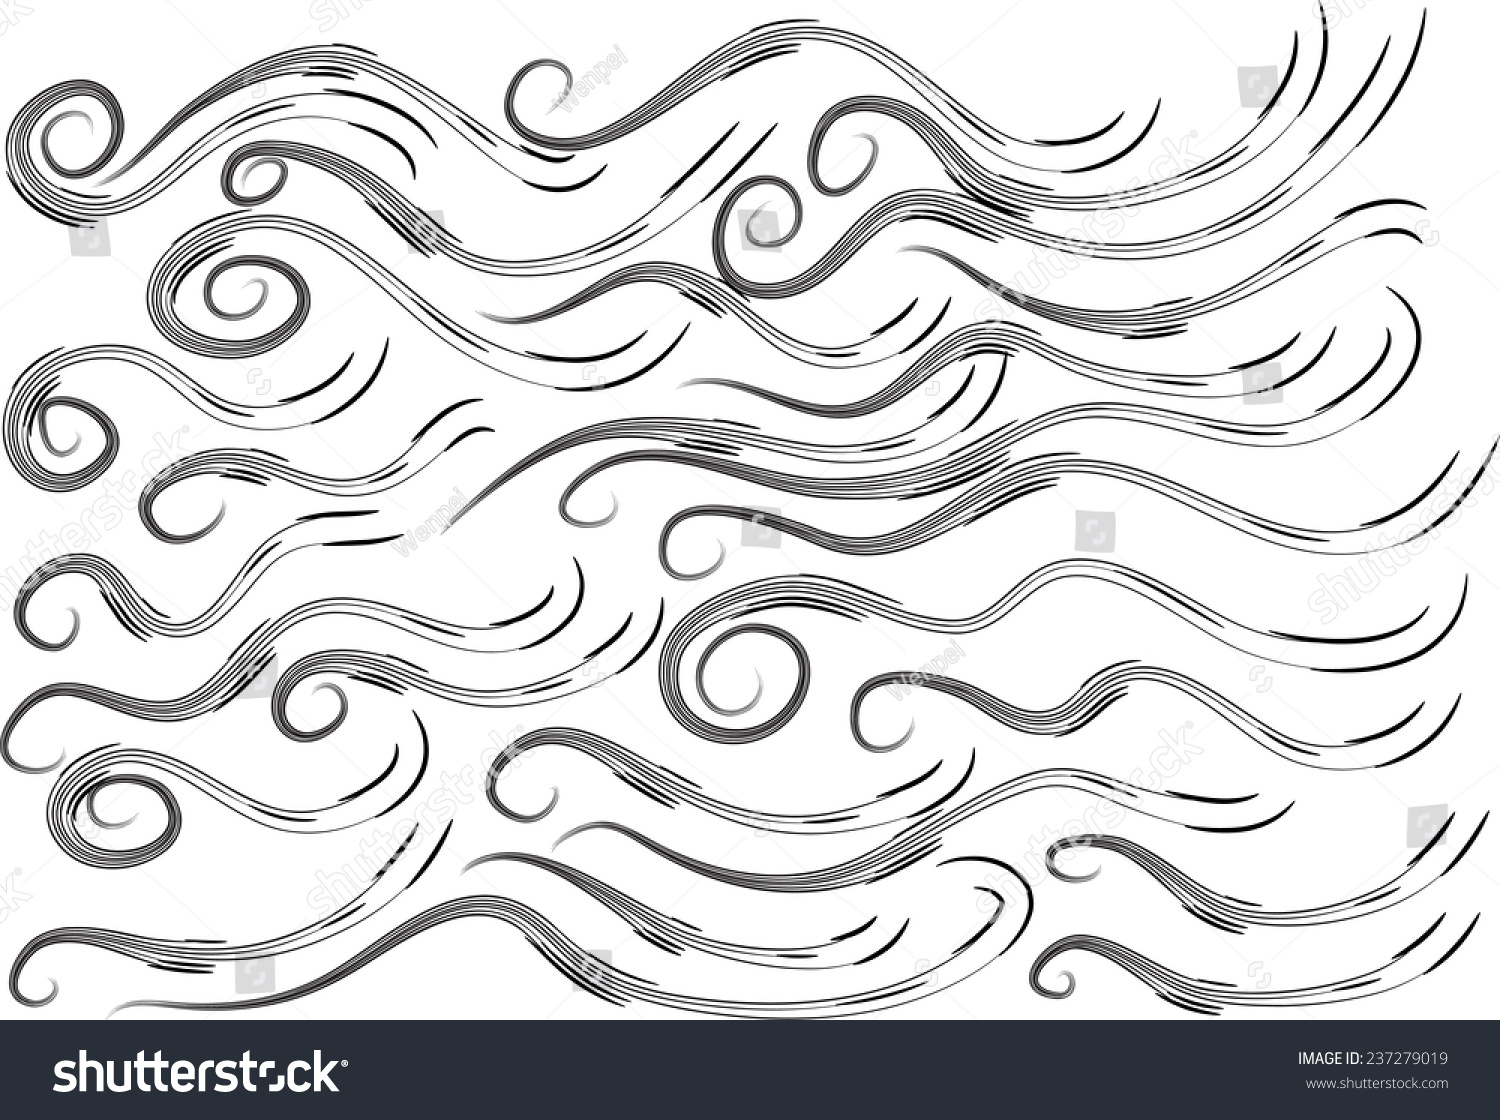 Vector Drawing Lines Stock Vector (Royalty Free) 237279019 - Shutterstock